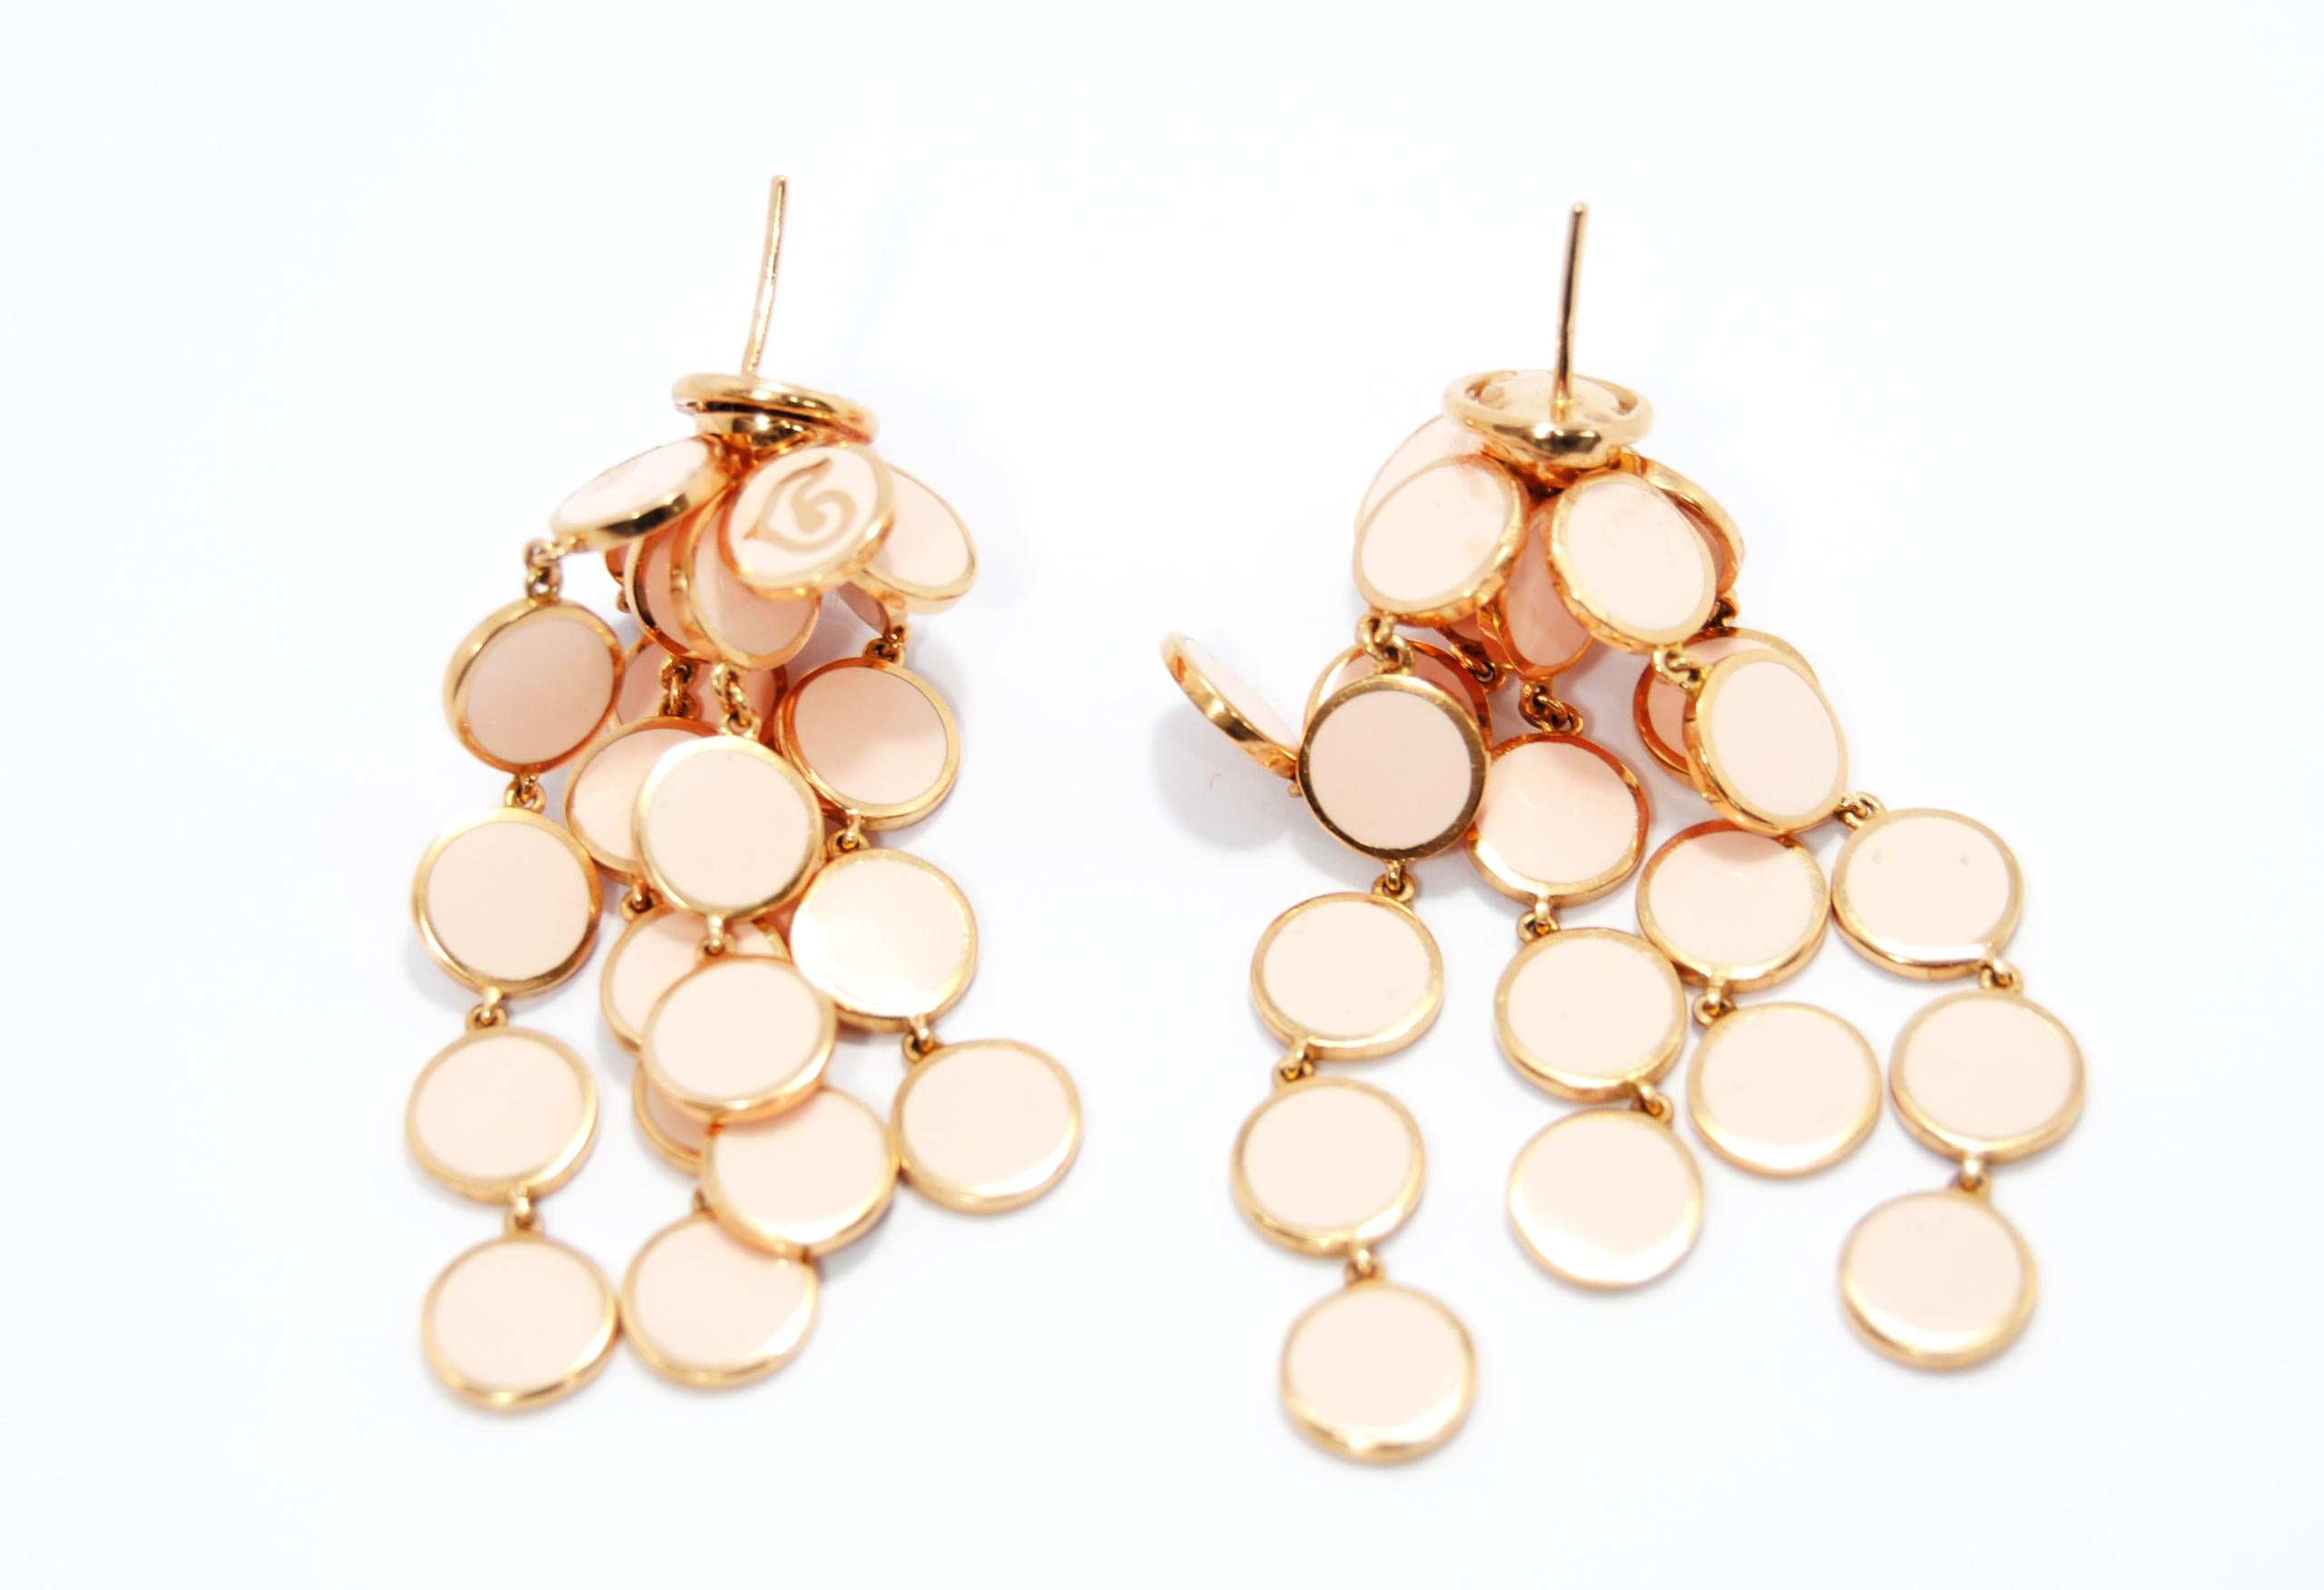 Chantecler Pink Pailletes Earrings, a glitttering cascade of precious petals, enriched by enamels encircled by rose gold Weight 10gr each and lenght 12mm 
Inspired by the caprese Dolce Vita of the Fifties, Paillettes is the epitome of a happy and